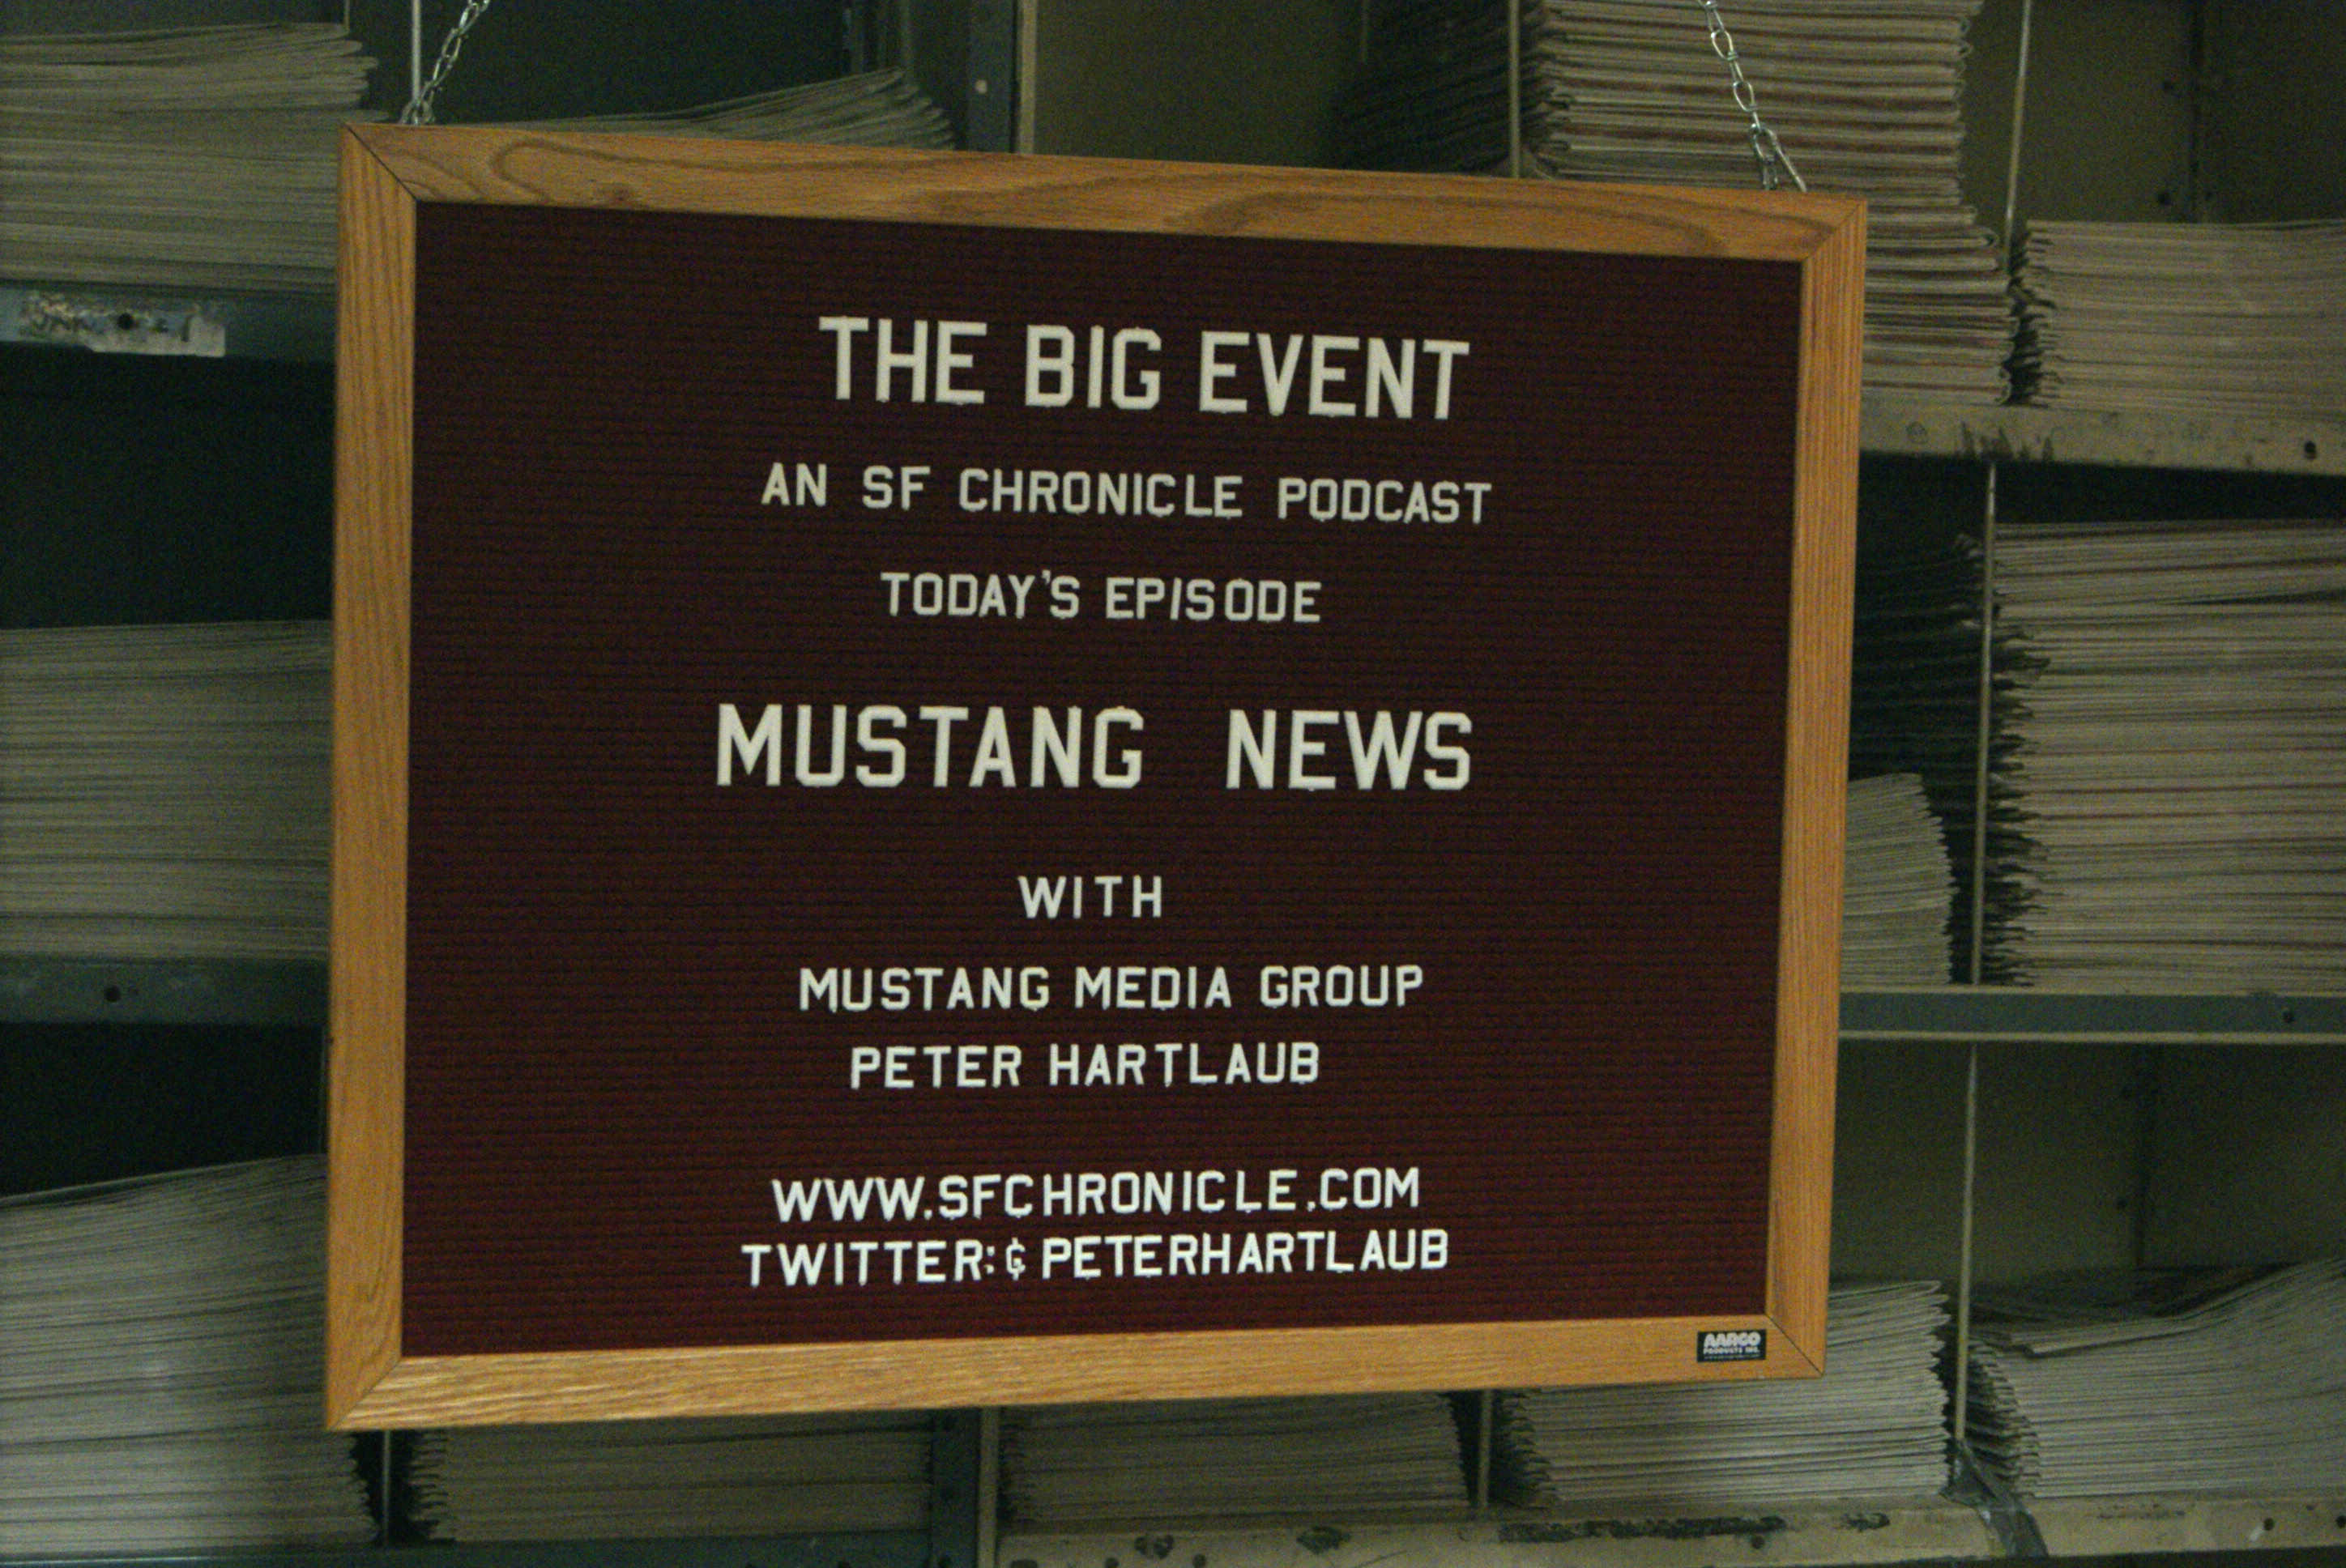 Pater Hartlaub's podcast sign in the San Francisco Chronicle archives, where Mustang News toured.